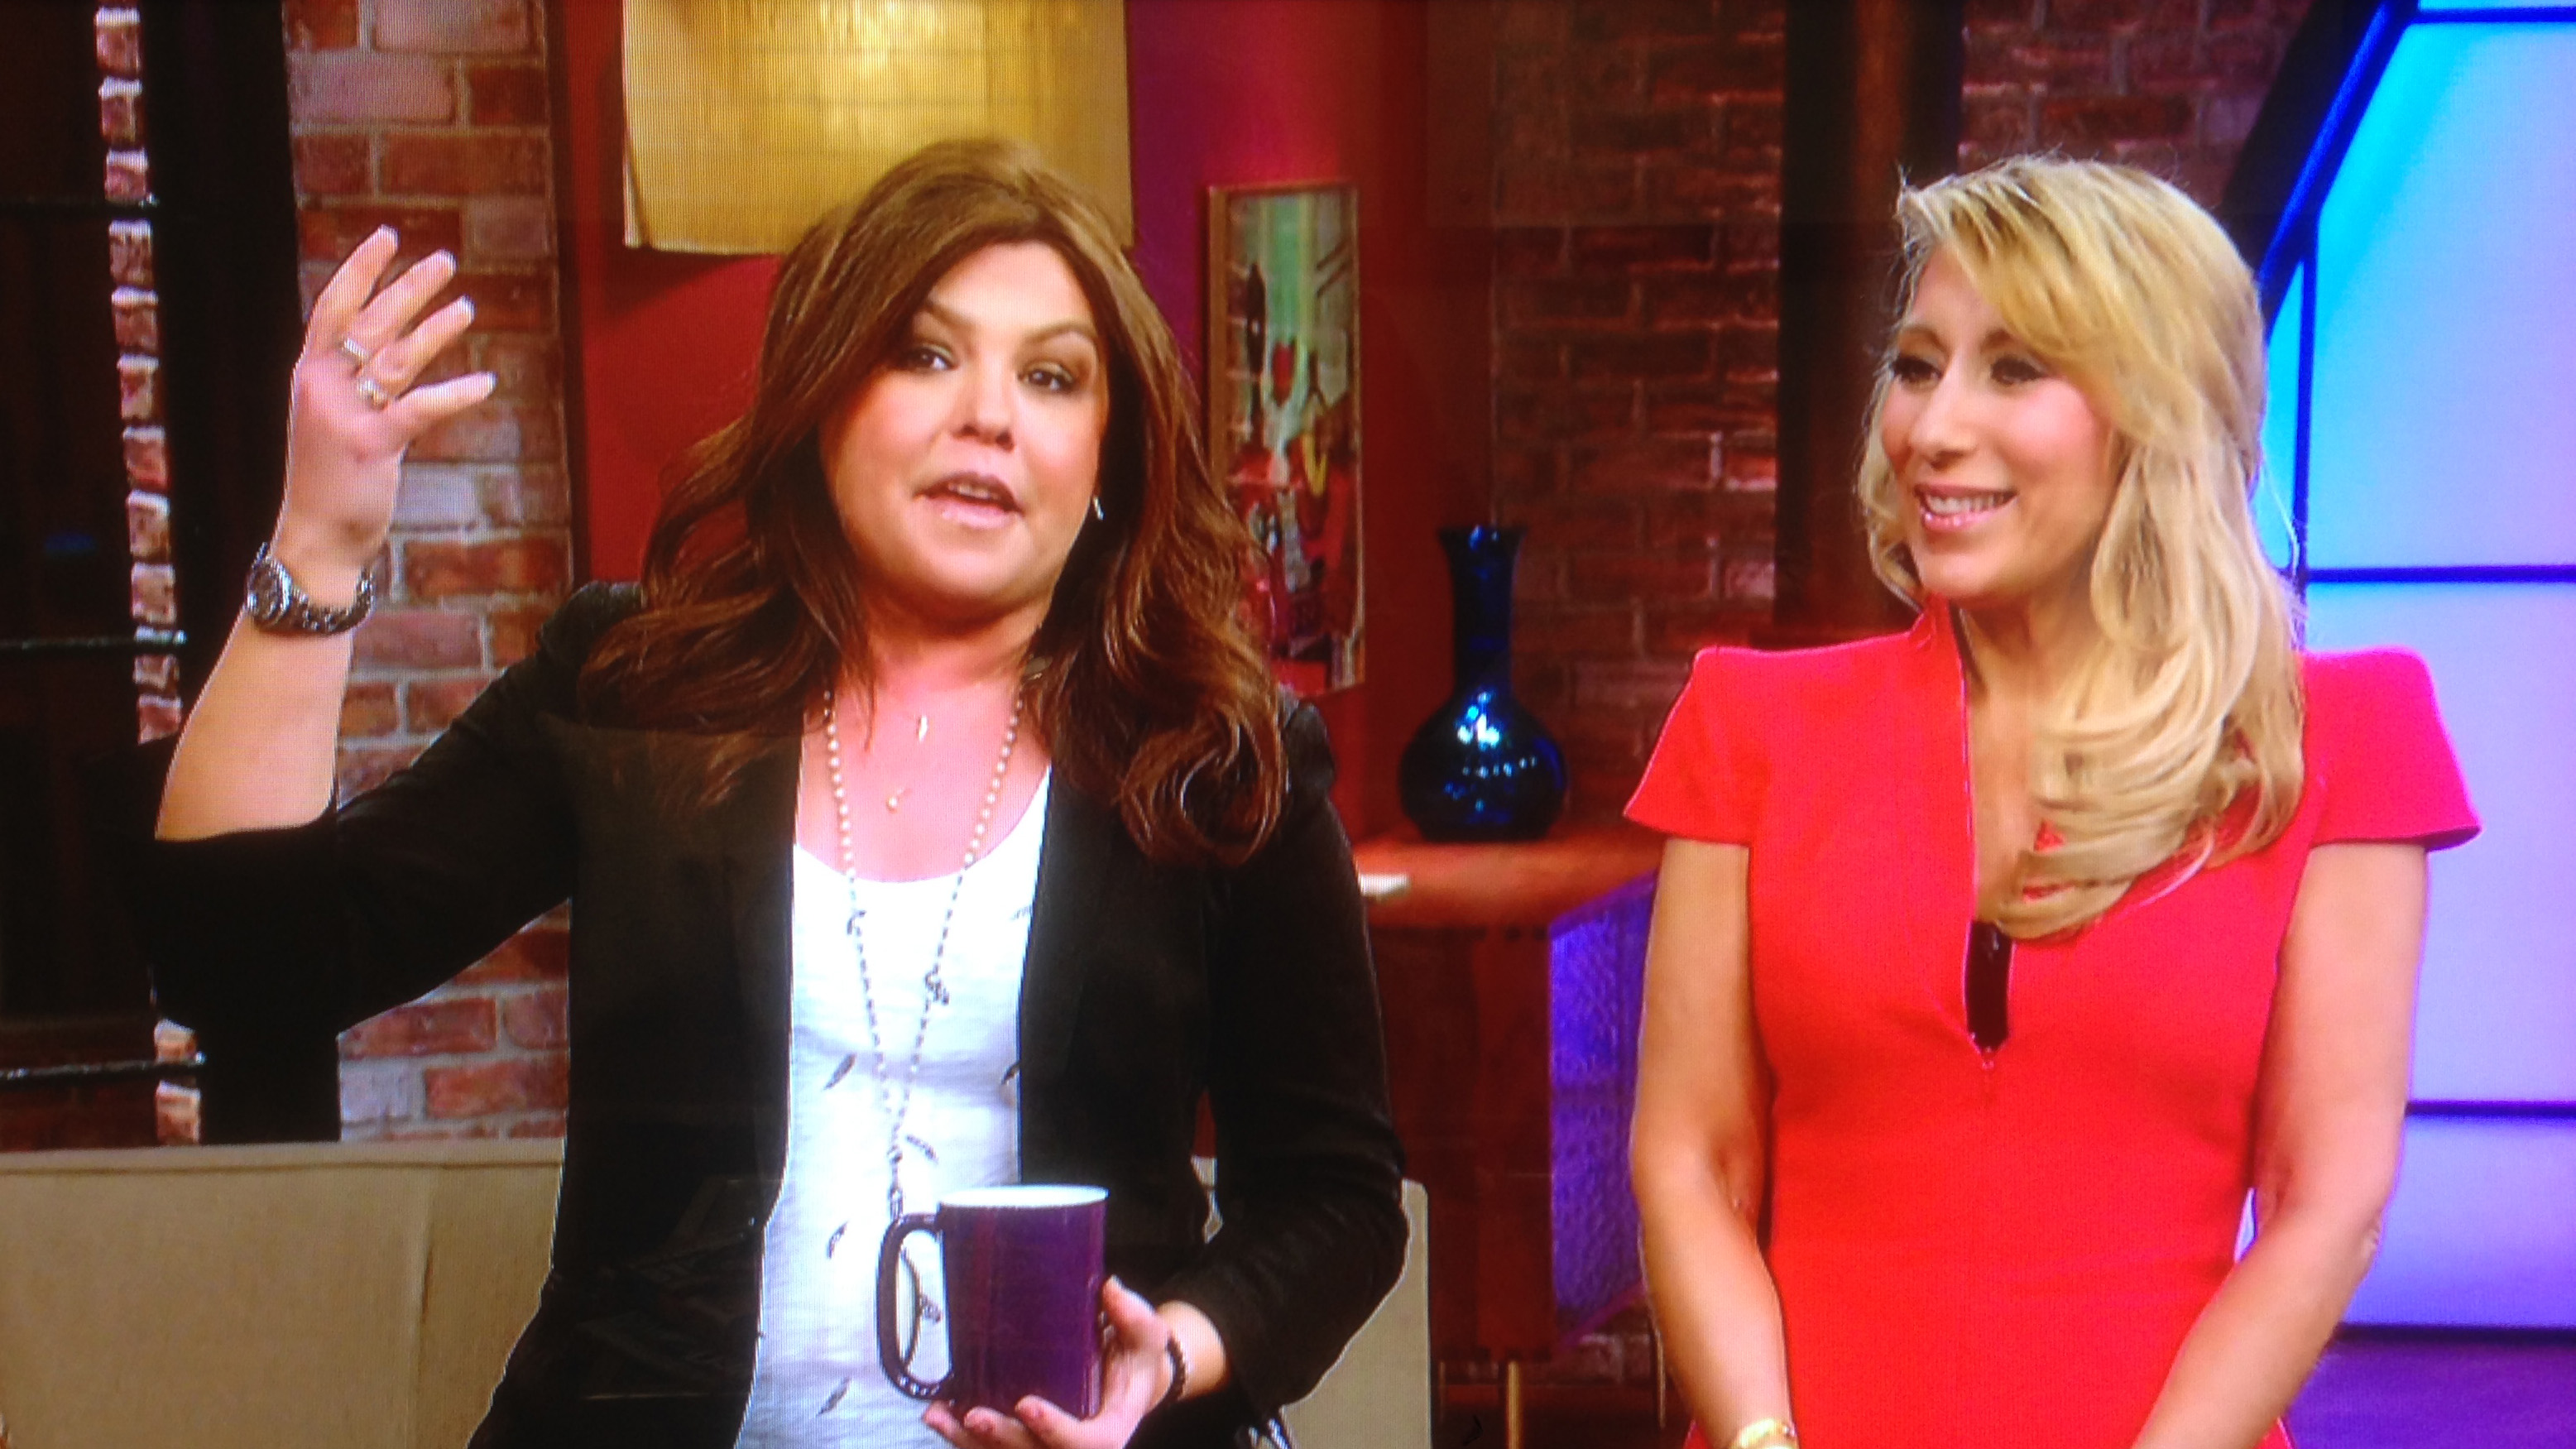 Rachael Ray / Lori Greiner - Judging Cook Book Concept Competition